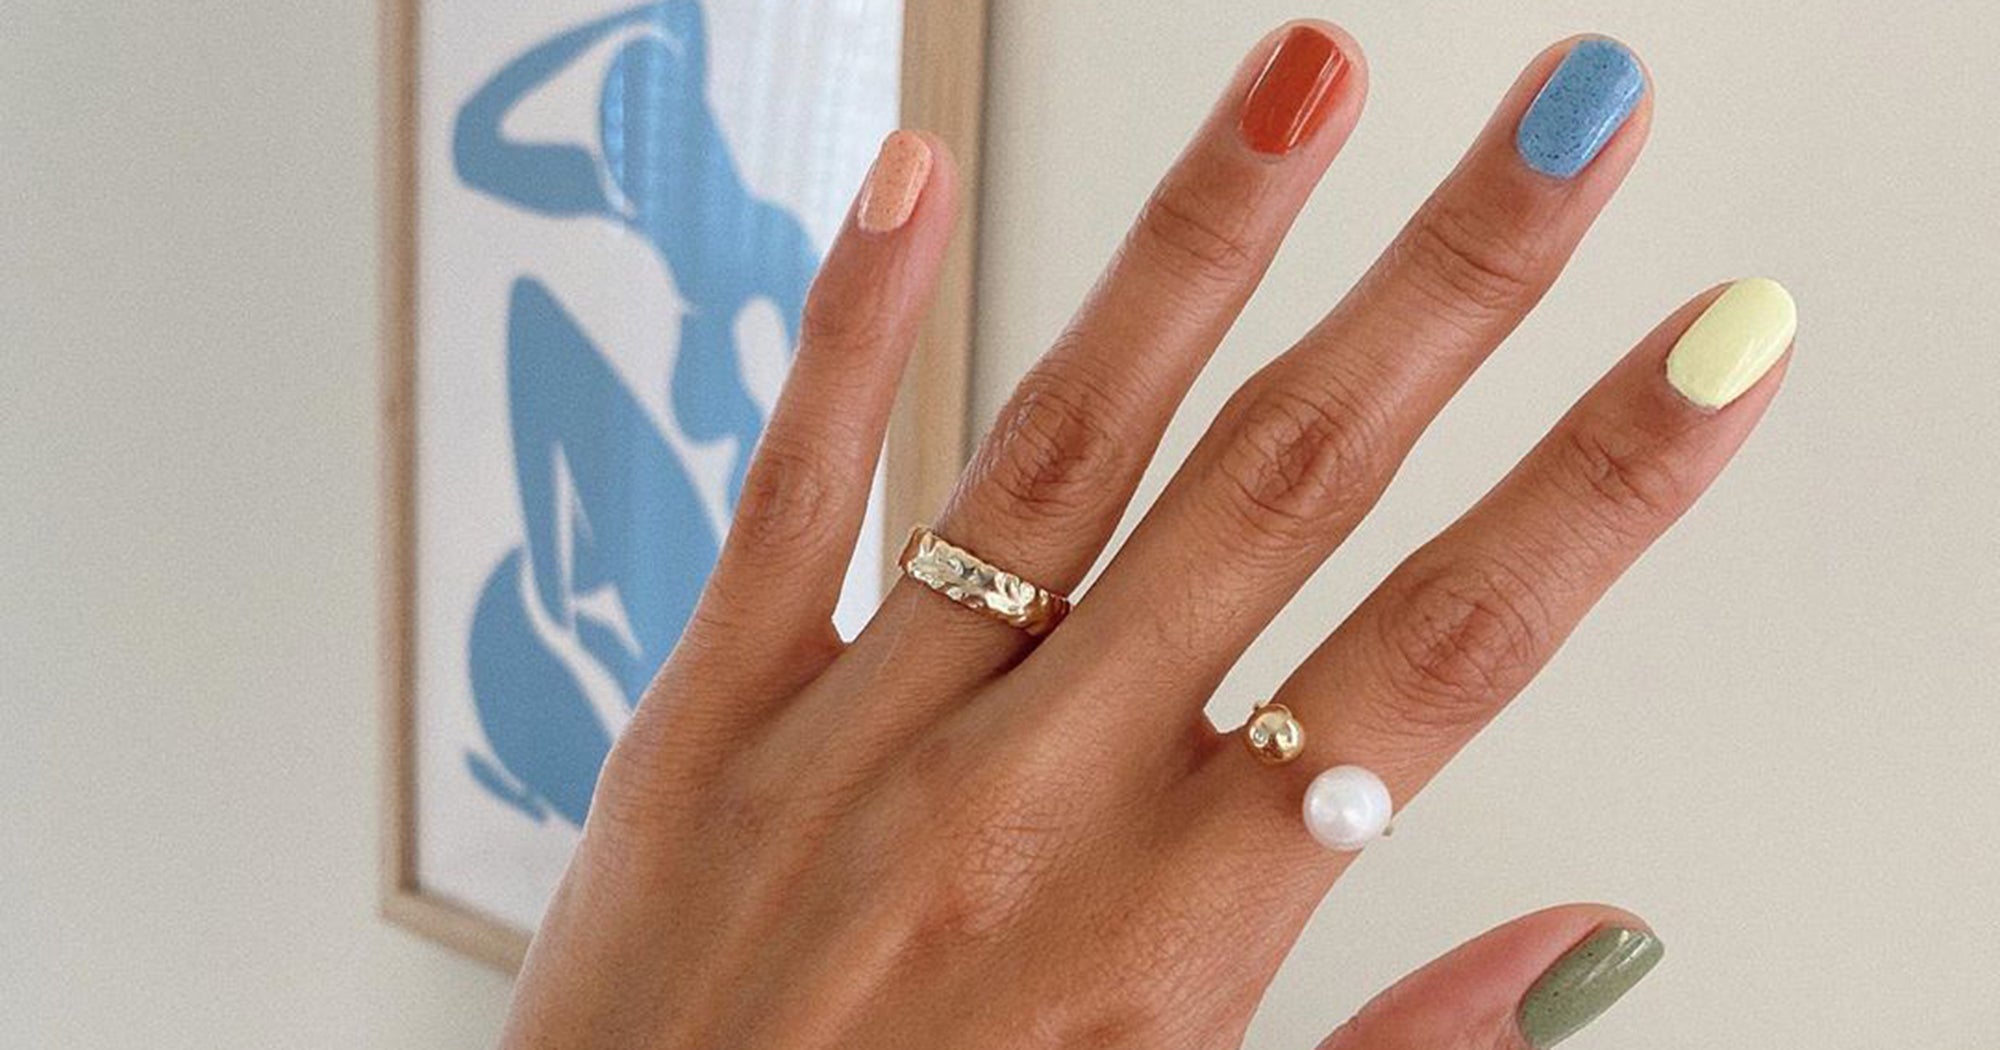 1. "Top 10 Spring 2019 Nail Colors to Try Now" - wide 2